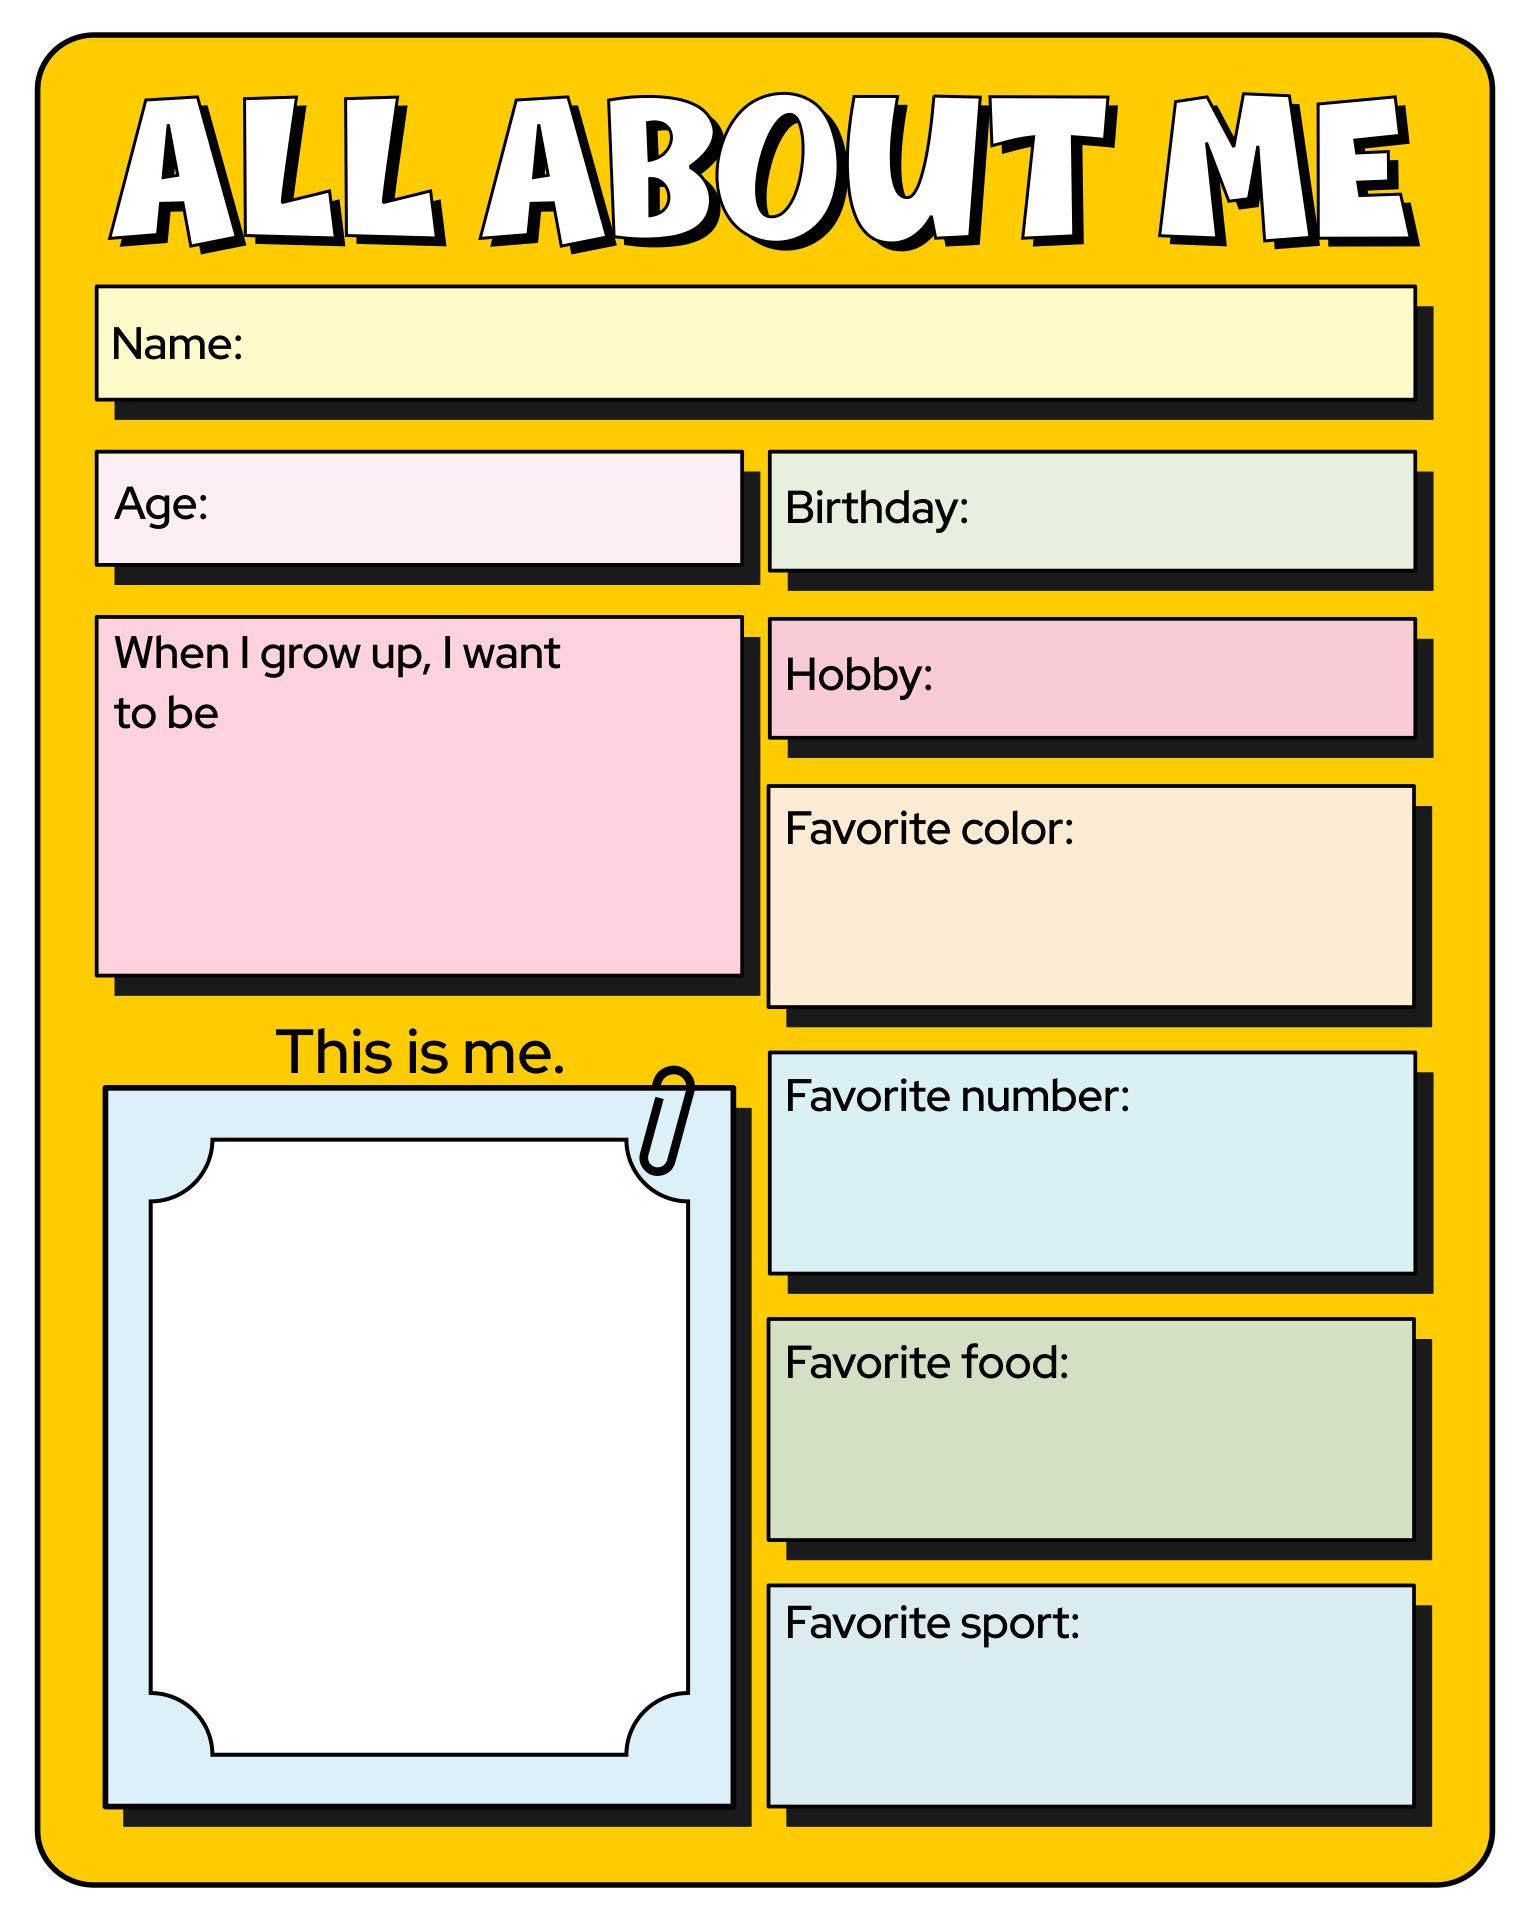 All About Me Worksheet Elementary